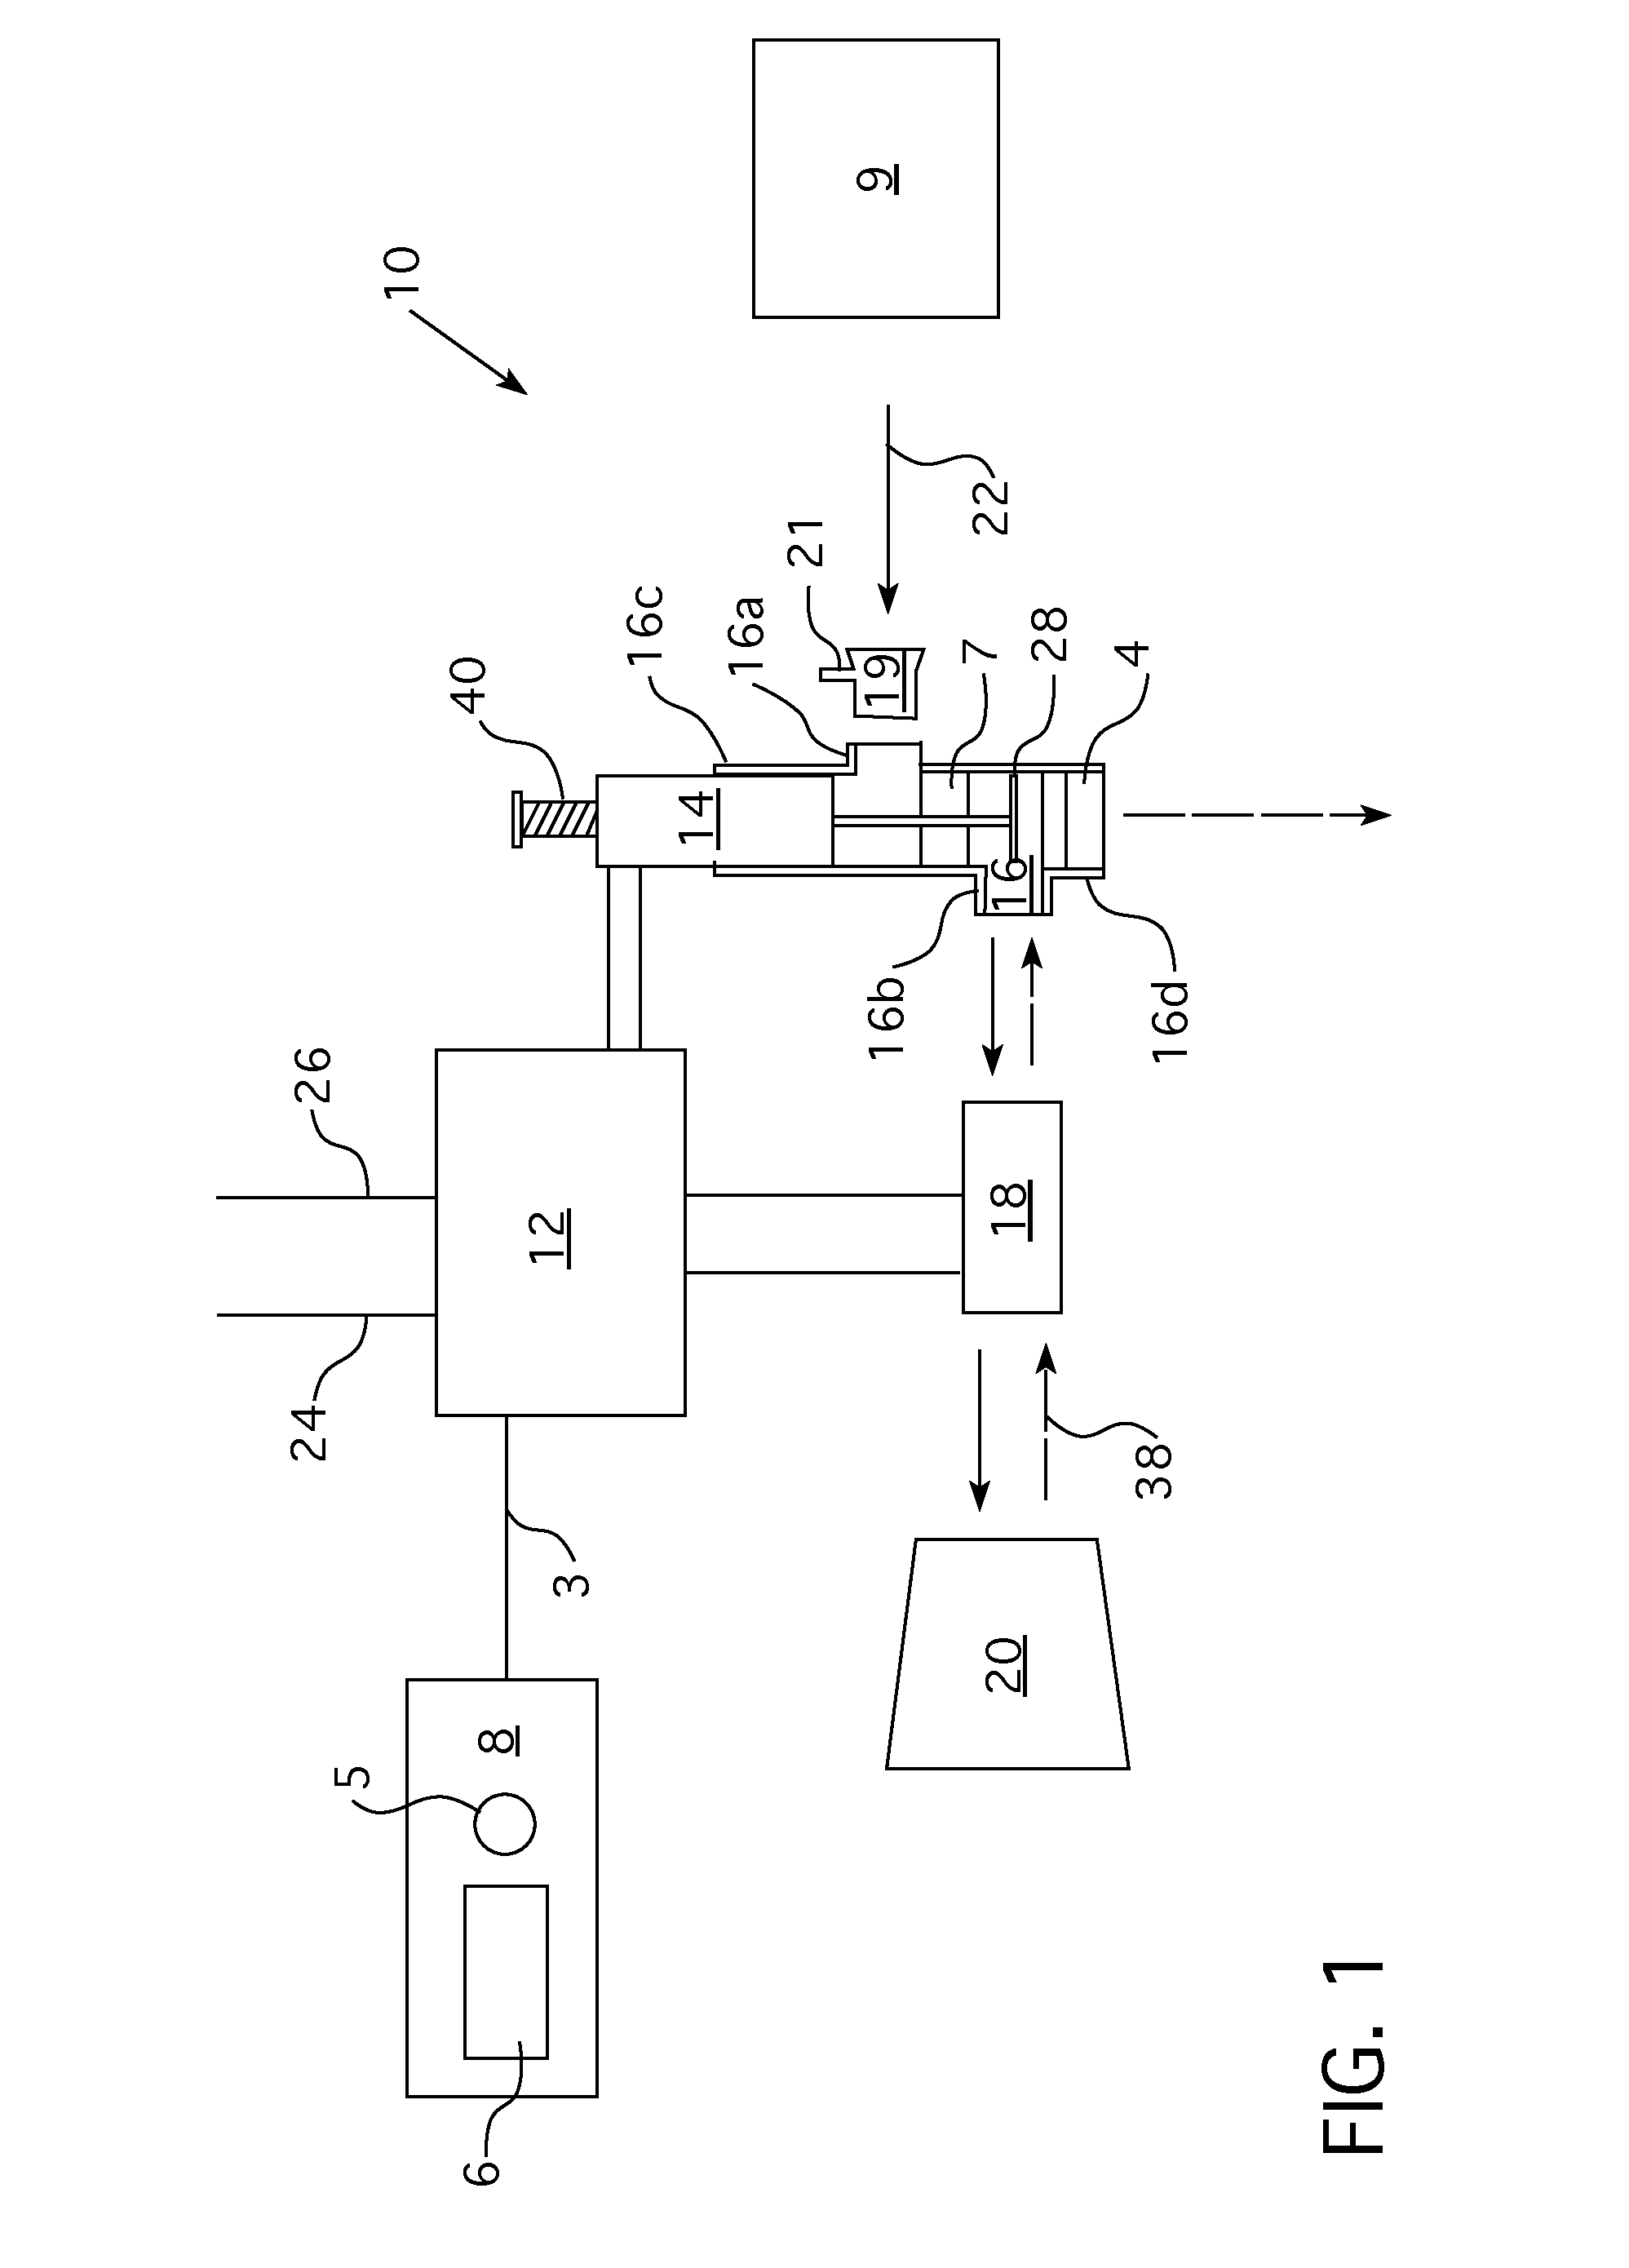 Method and Apparatus for maintaining airway patency and pressure support ventilation